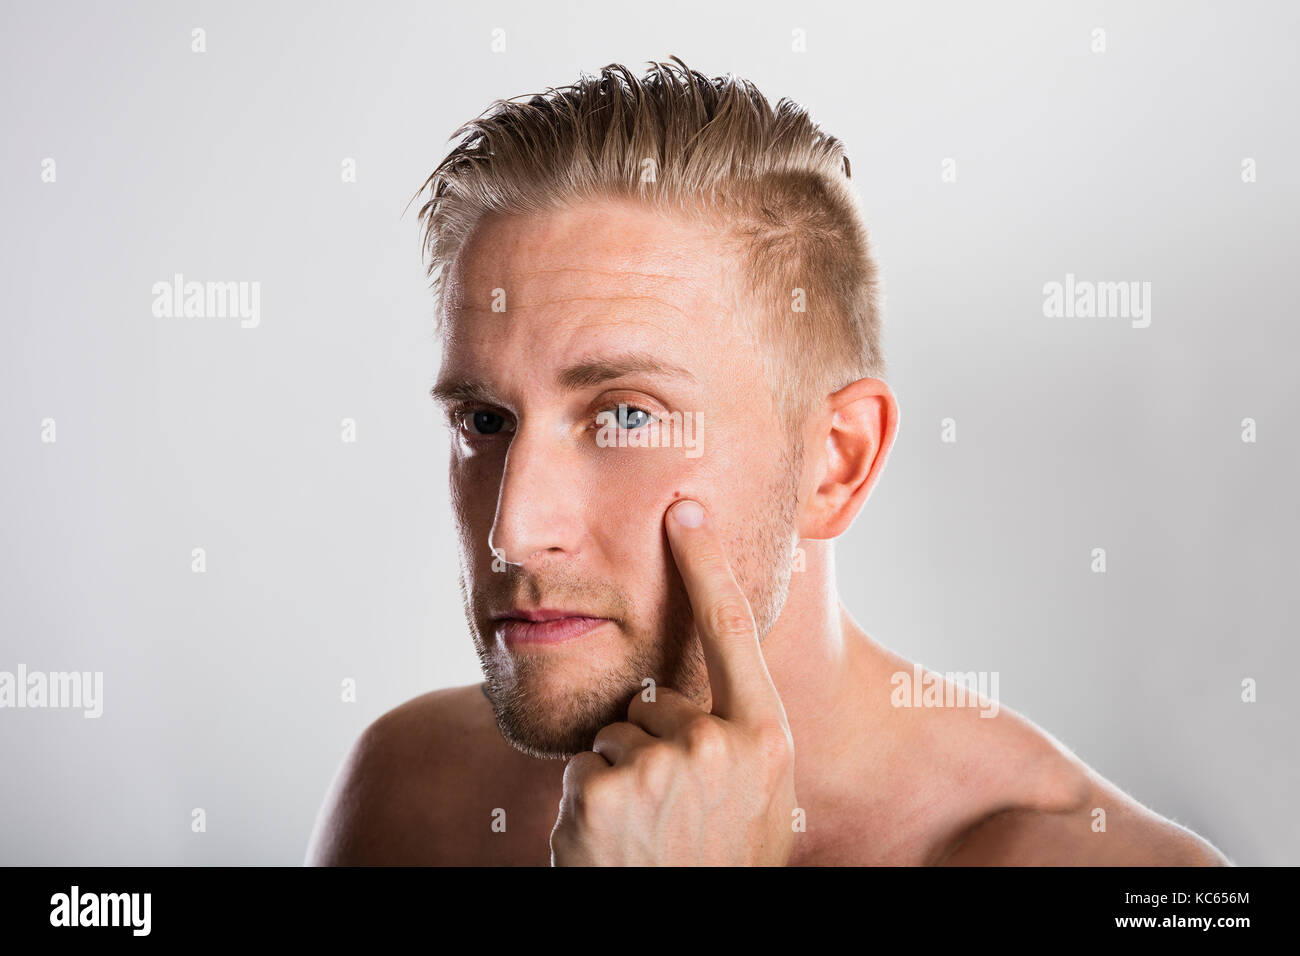 Man Squeezing Pimple On His Face. Acne Skin Problem Stock Photo